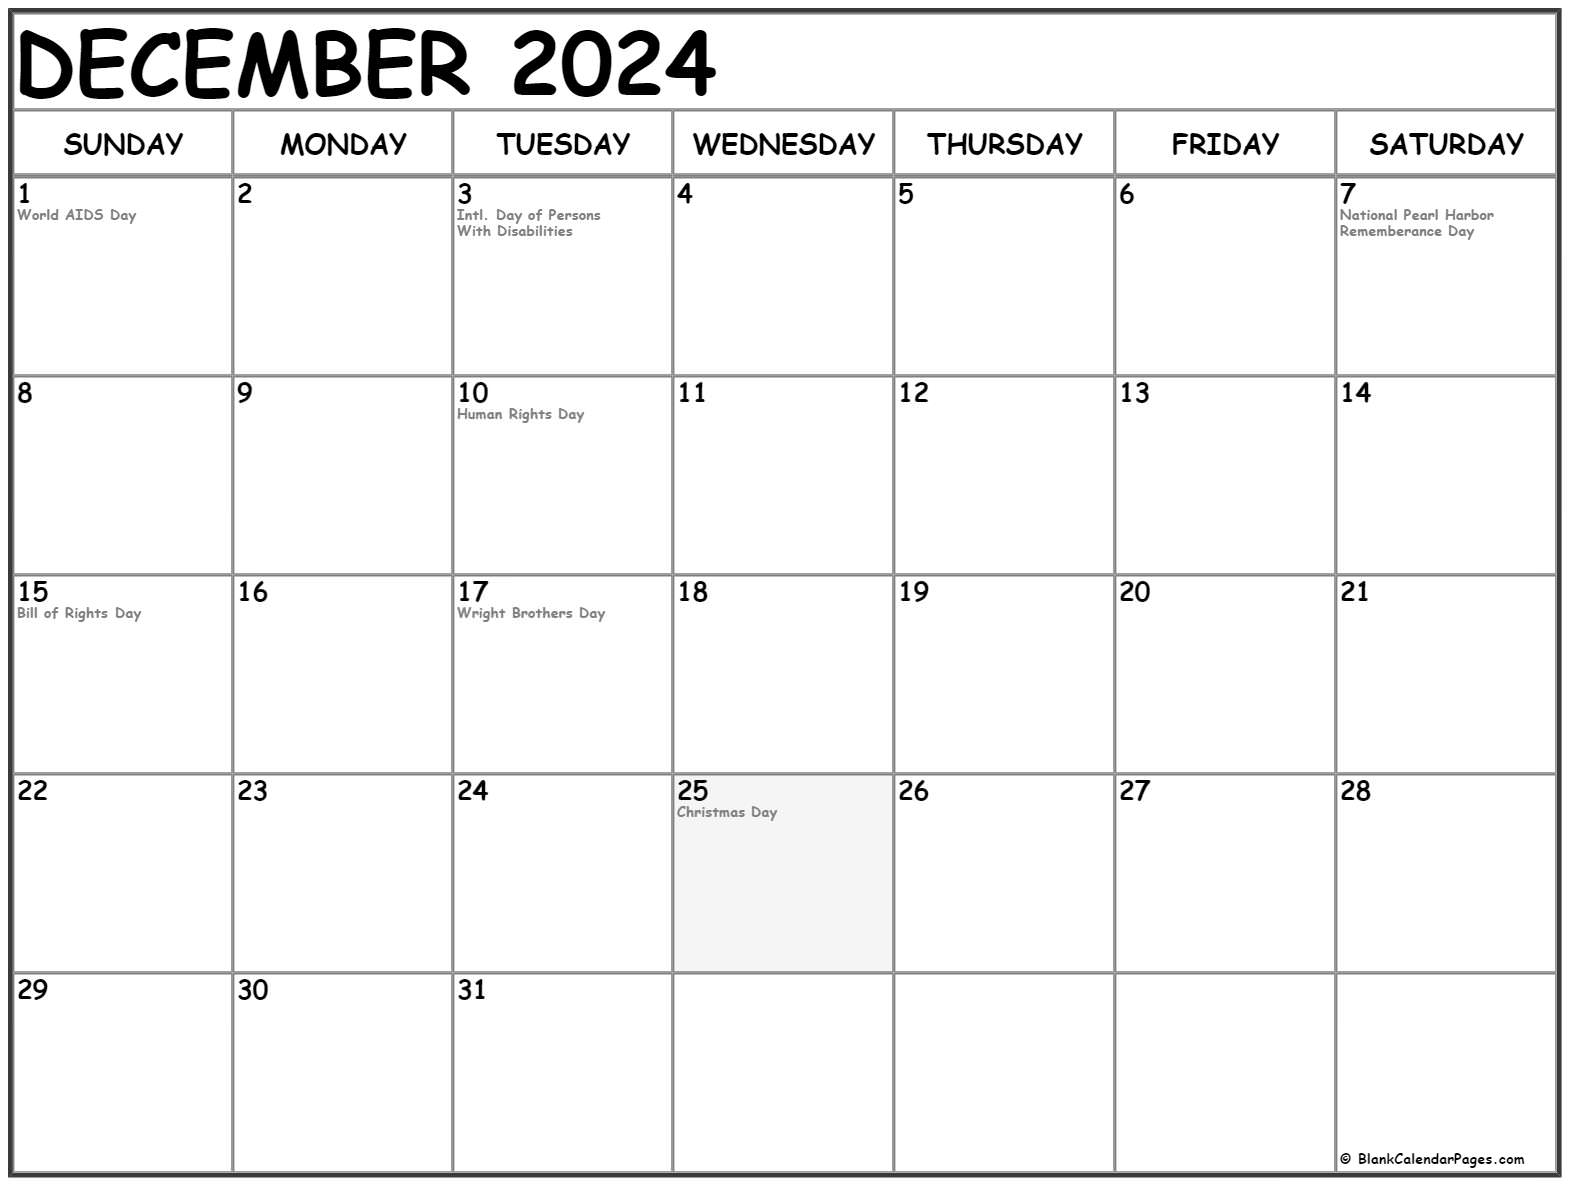 december-2018-calendar-with-holidays-business-template-holiday